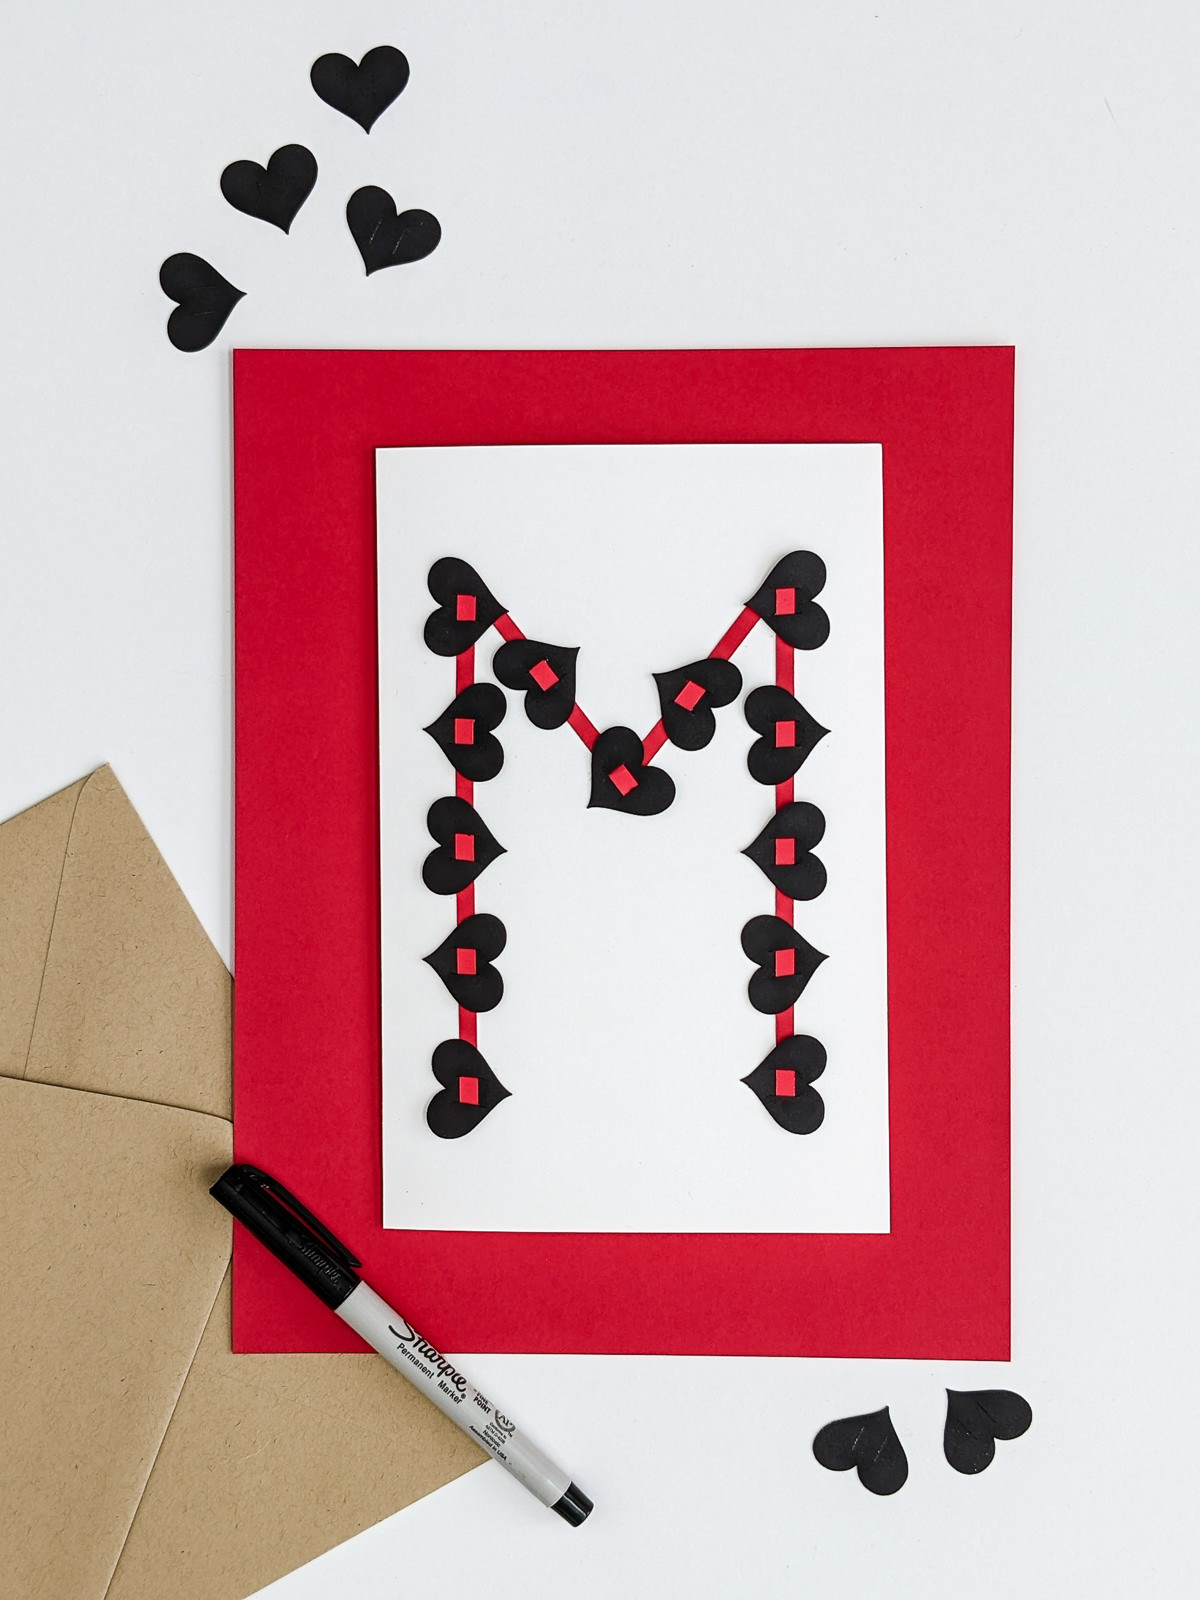 Handmade valentine for teens with black hearts and red strips of their first initial